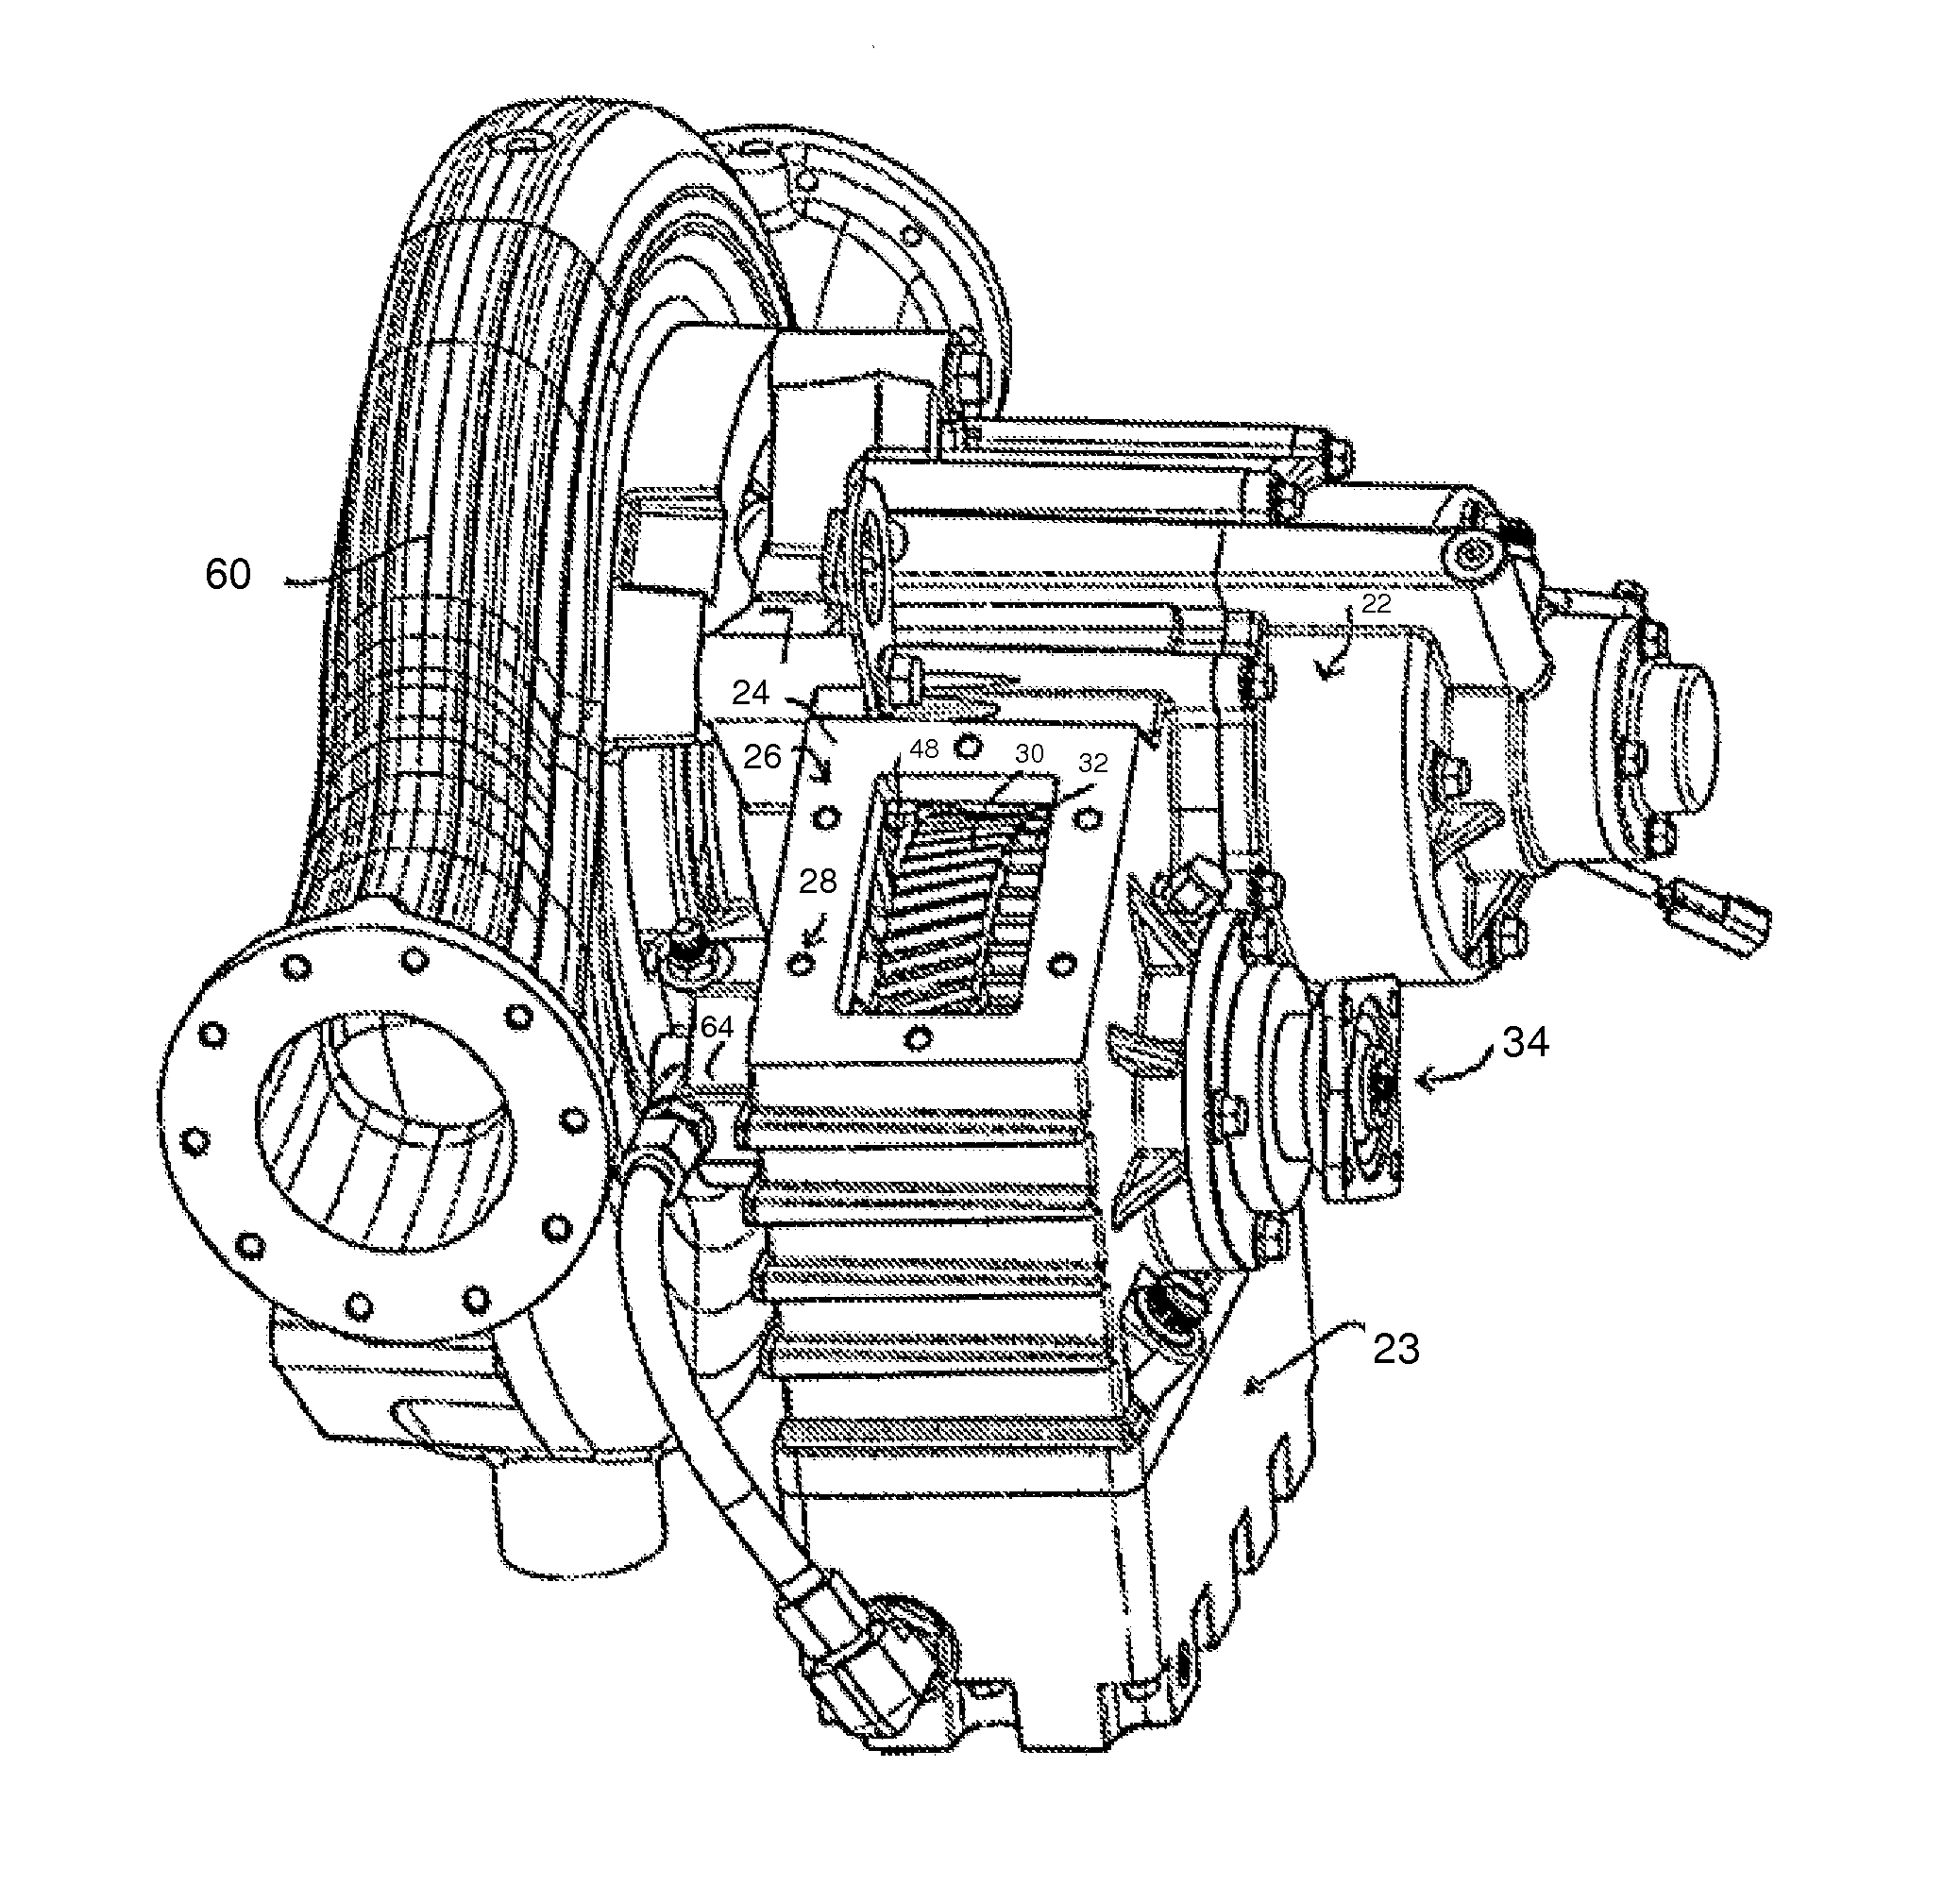 Pump transmission with PTO gear and independently clutched impeller